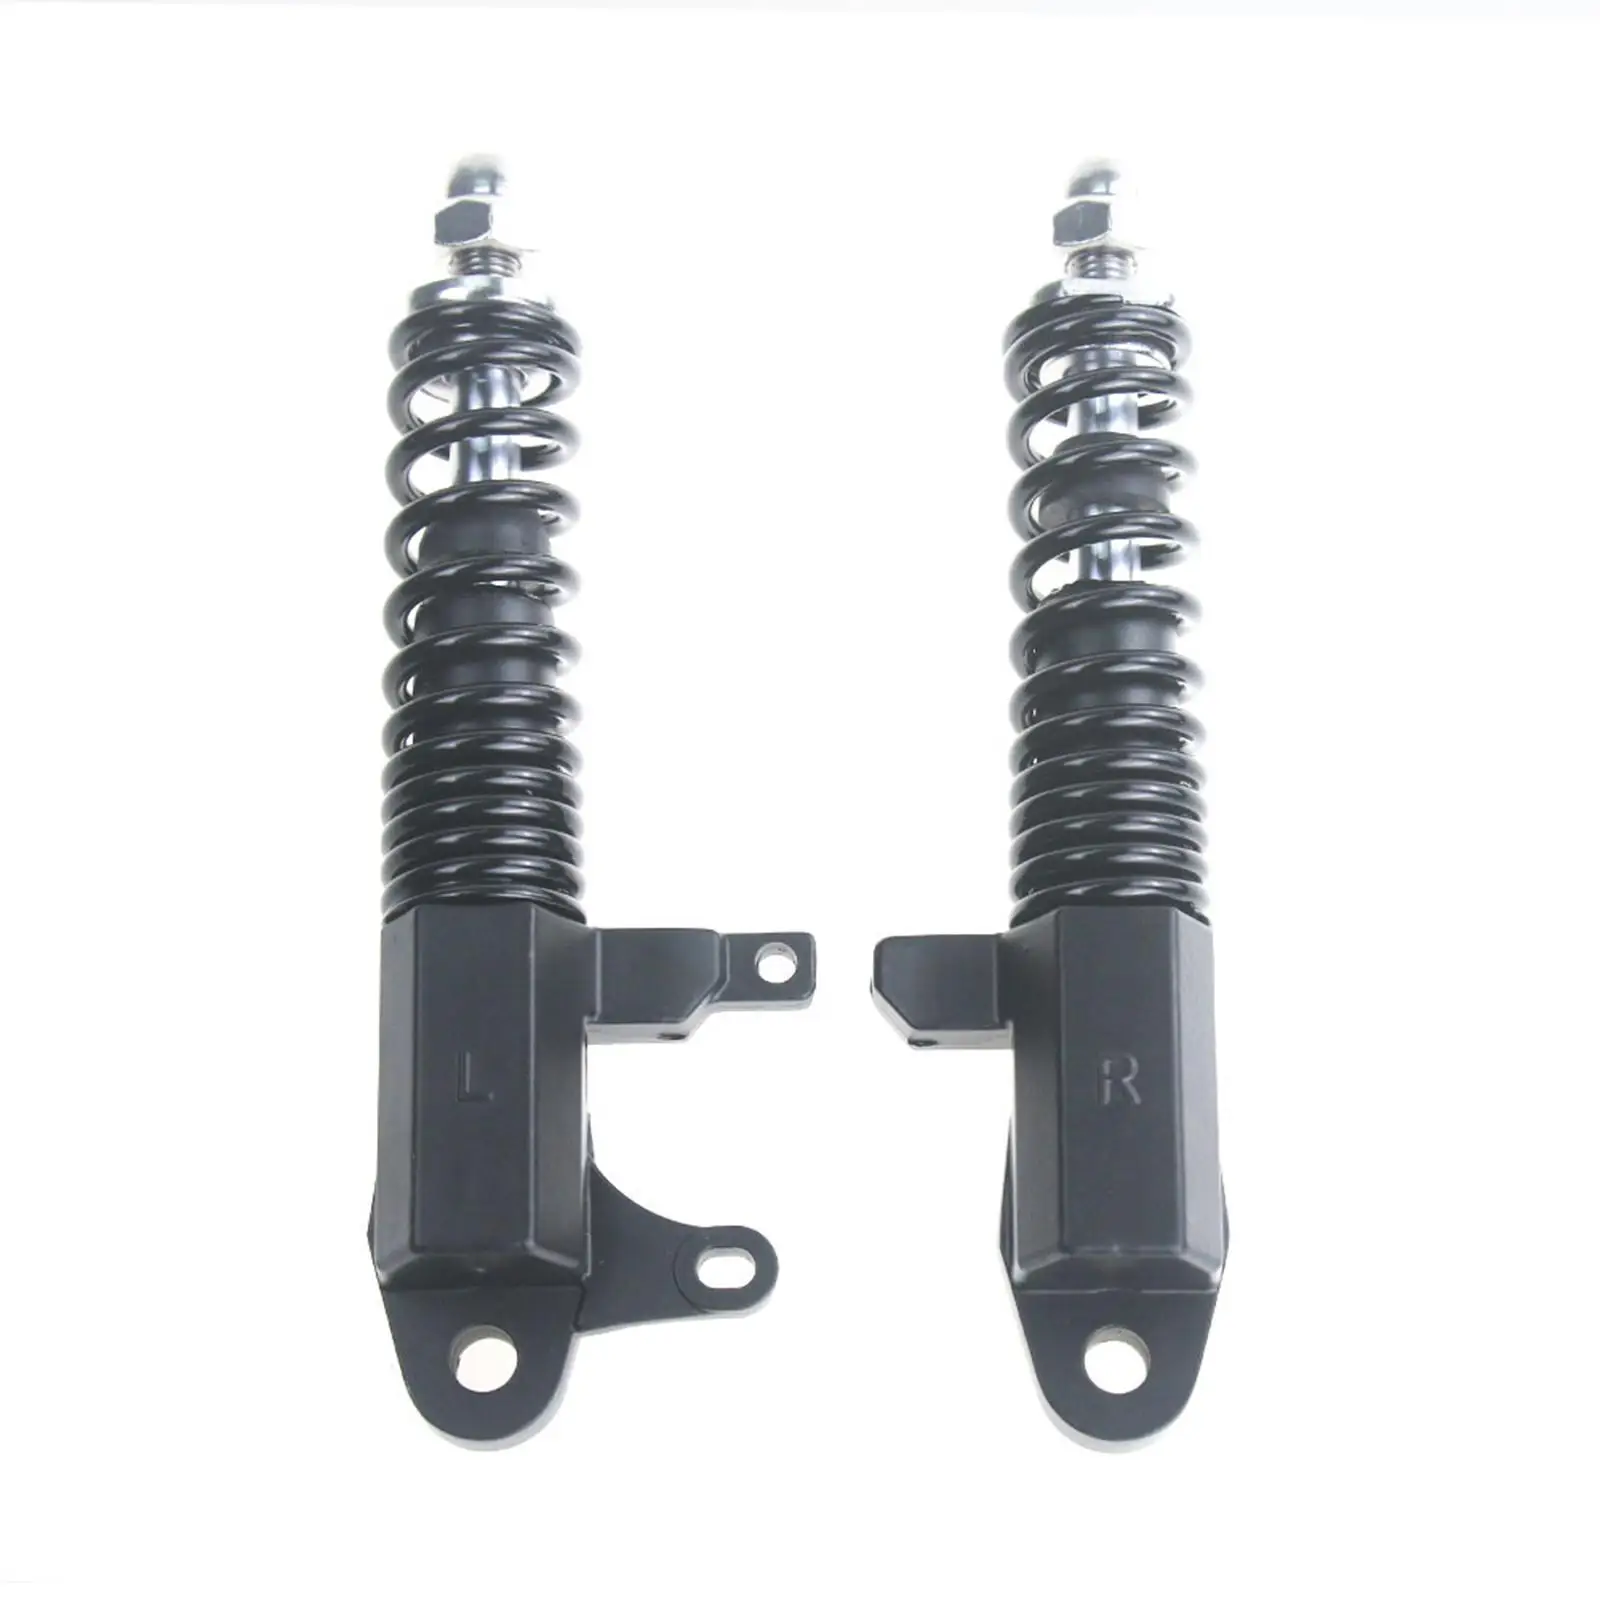 2x Front Fork Shock Absorber 10inch Premium Reduce Noise Aluminum Alloy Cycling Parts Front Black for Kugoo M4 Pro